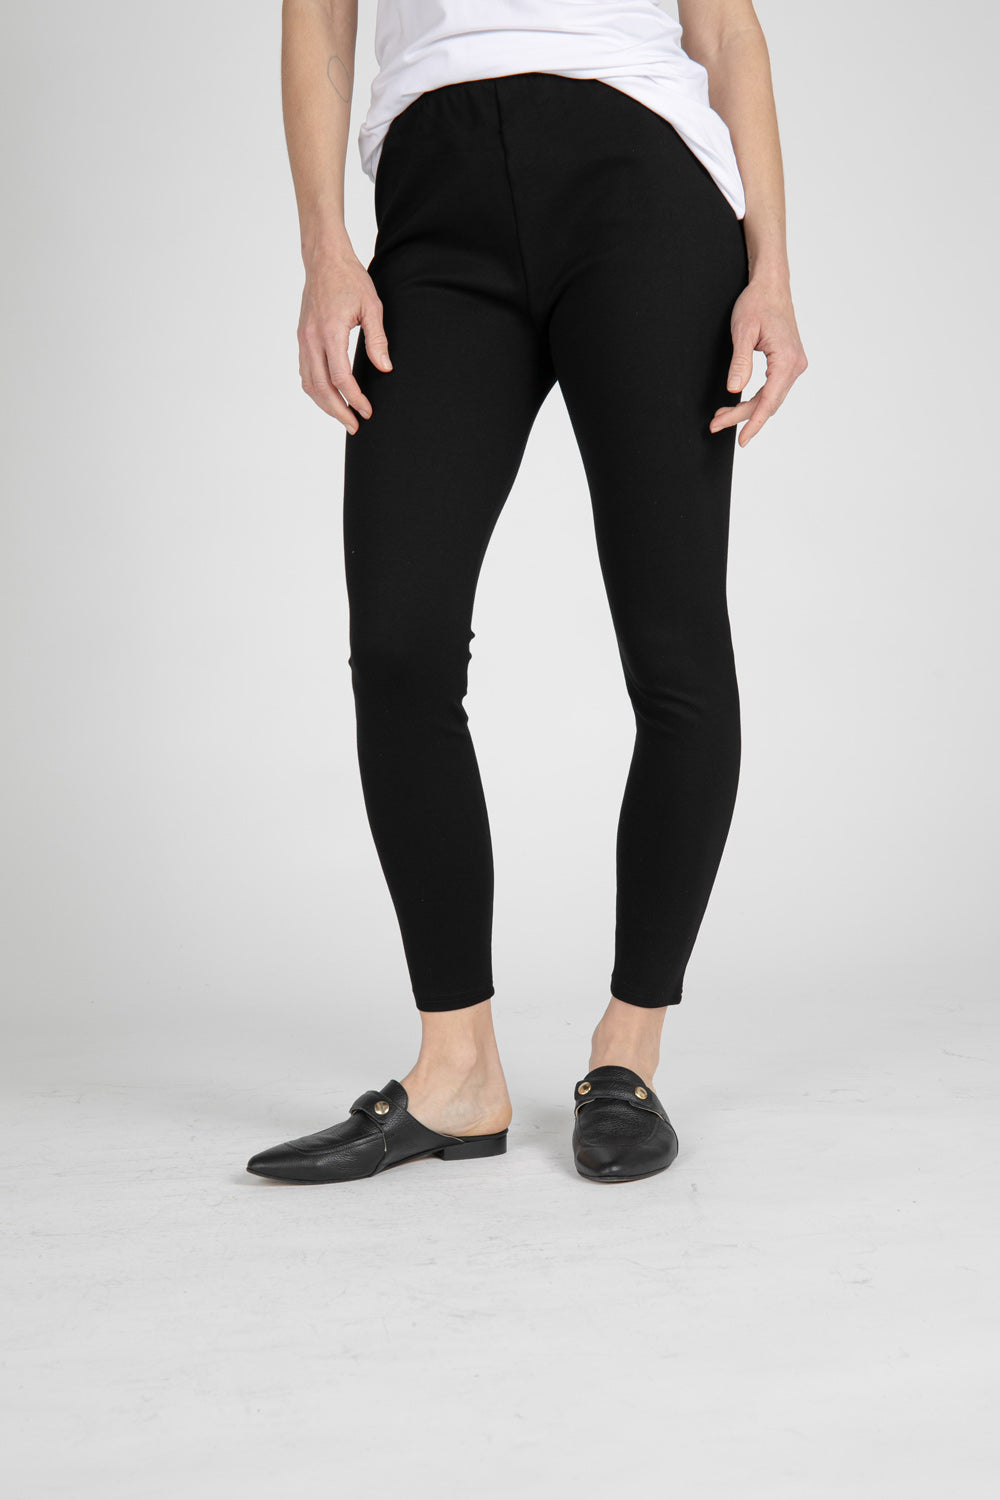 The All-Mighty Ponti Leggings